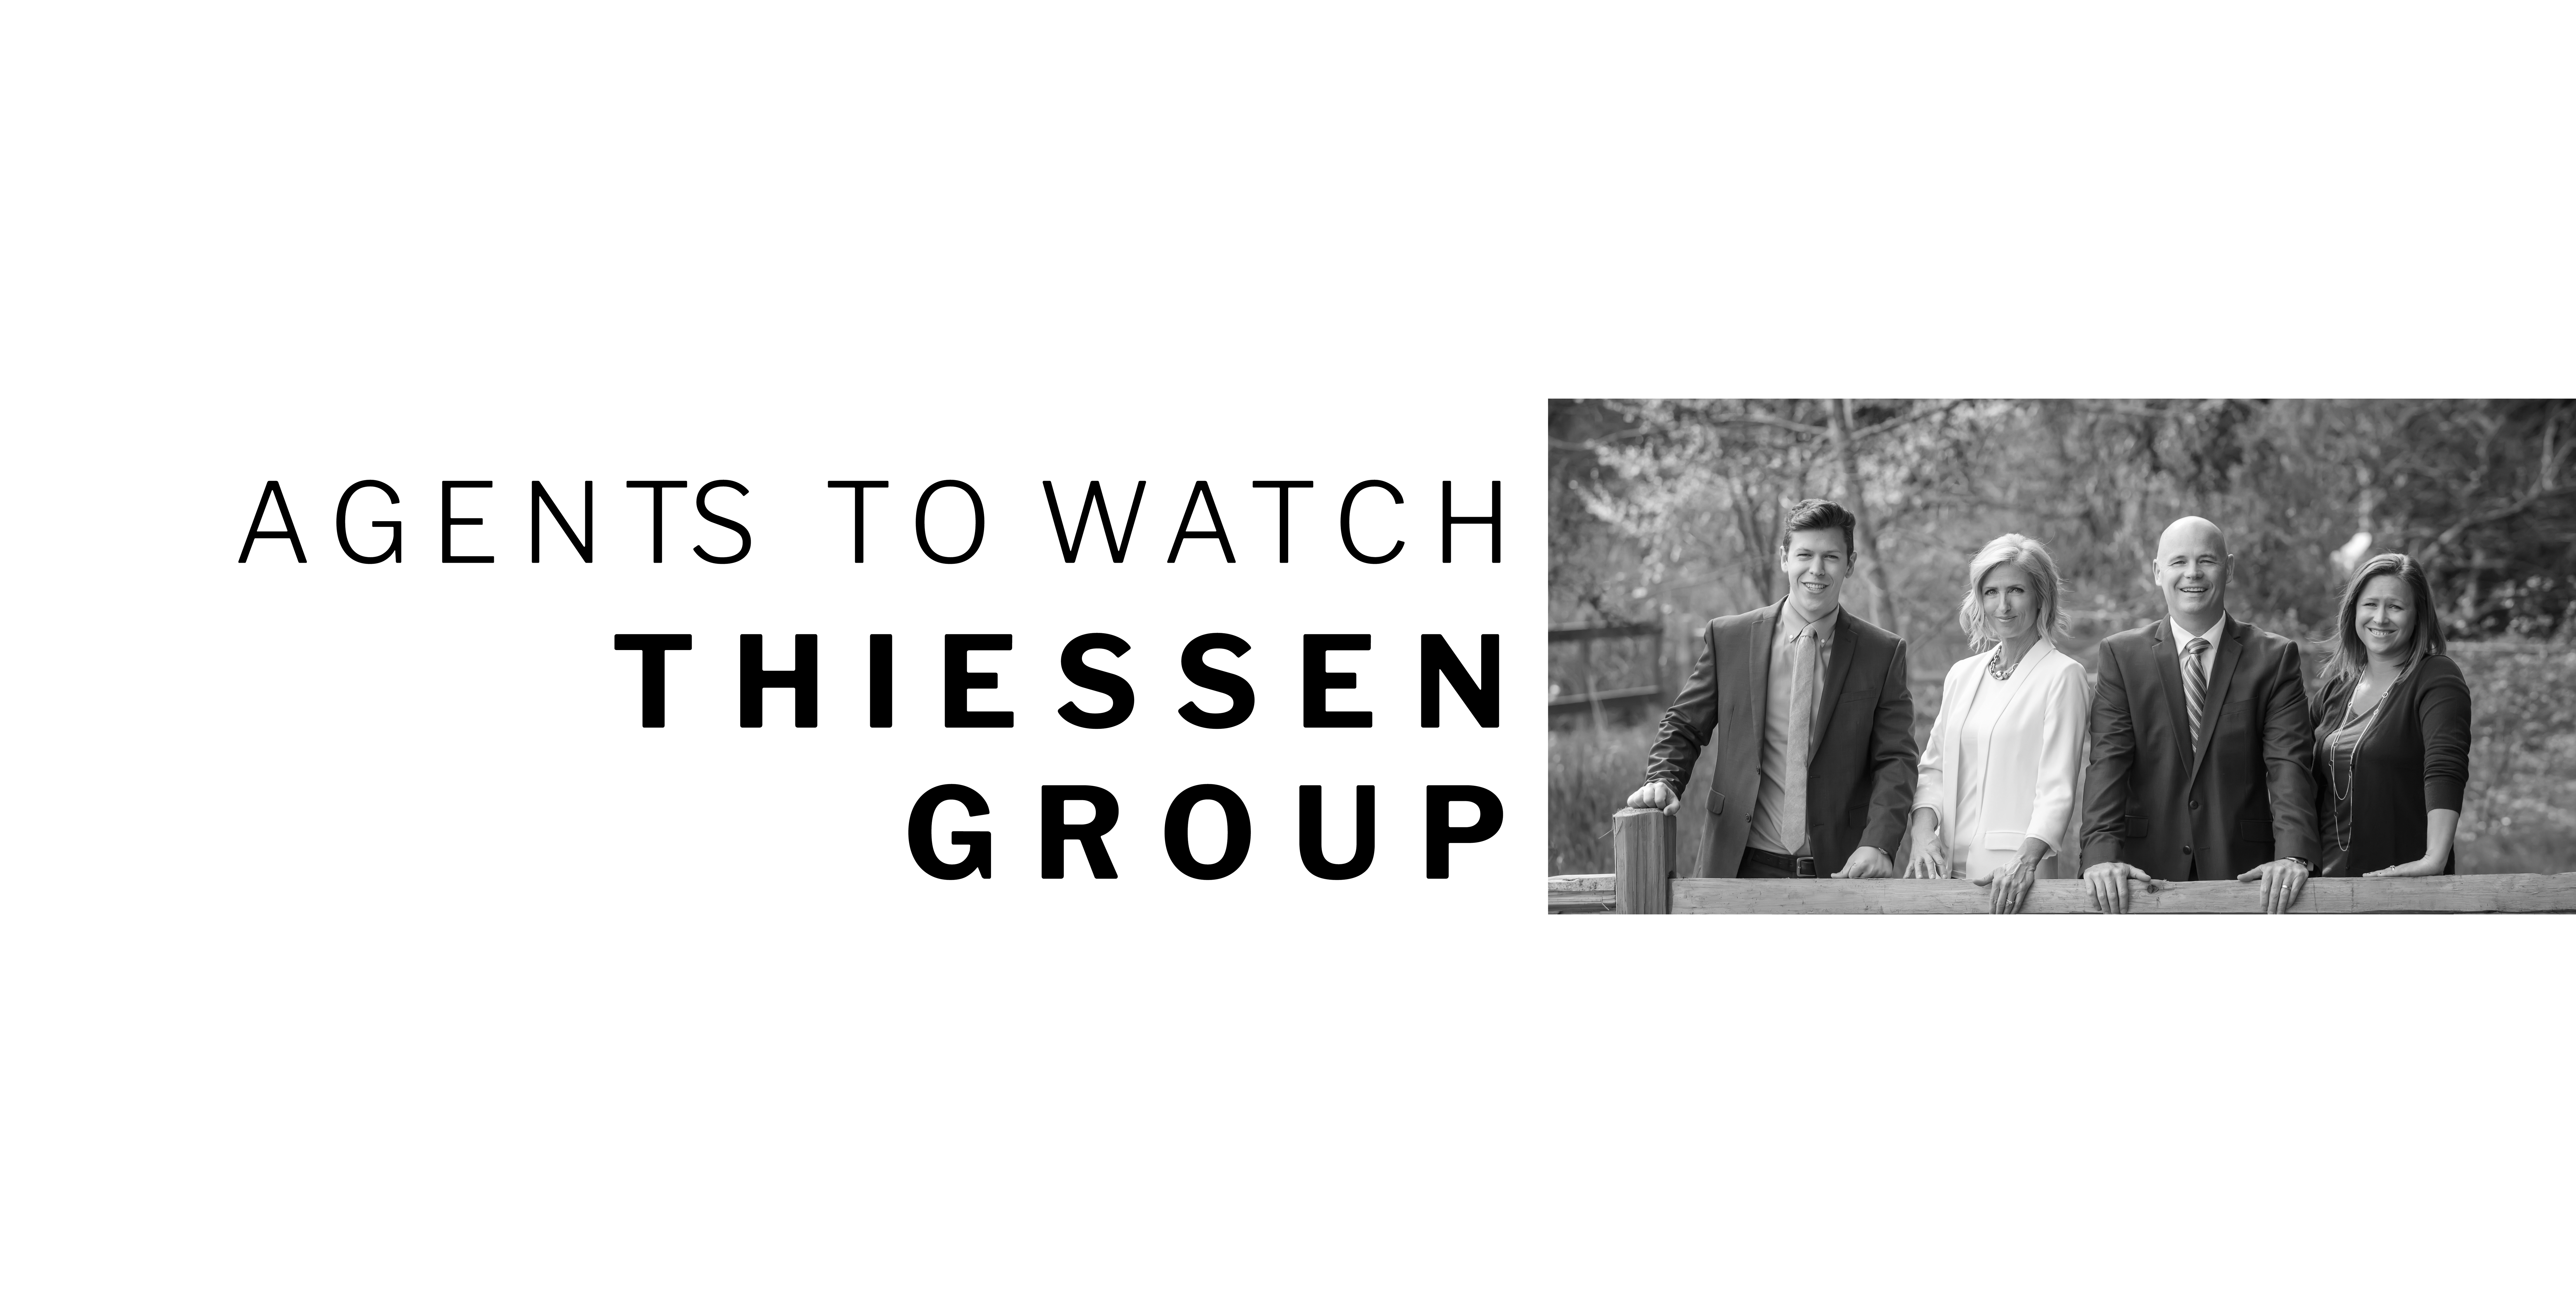 Agent to Watch TheissenGroup